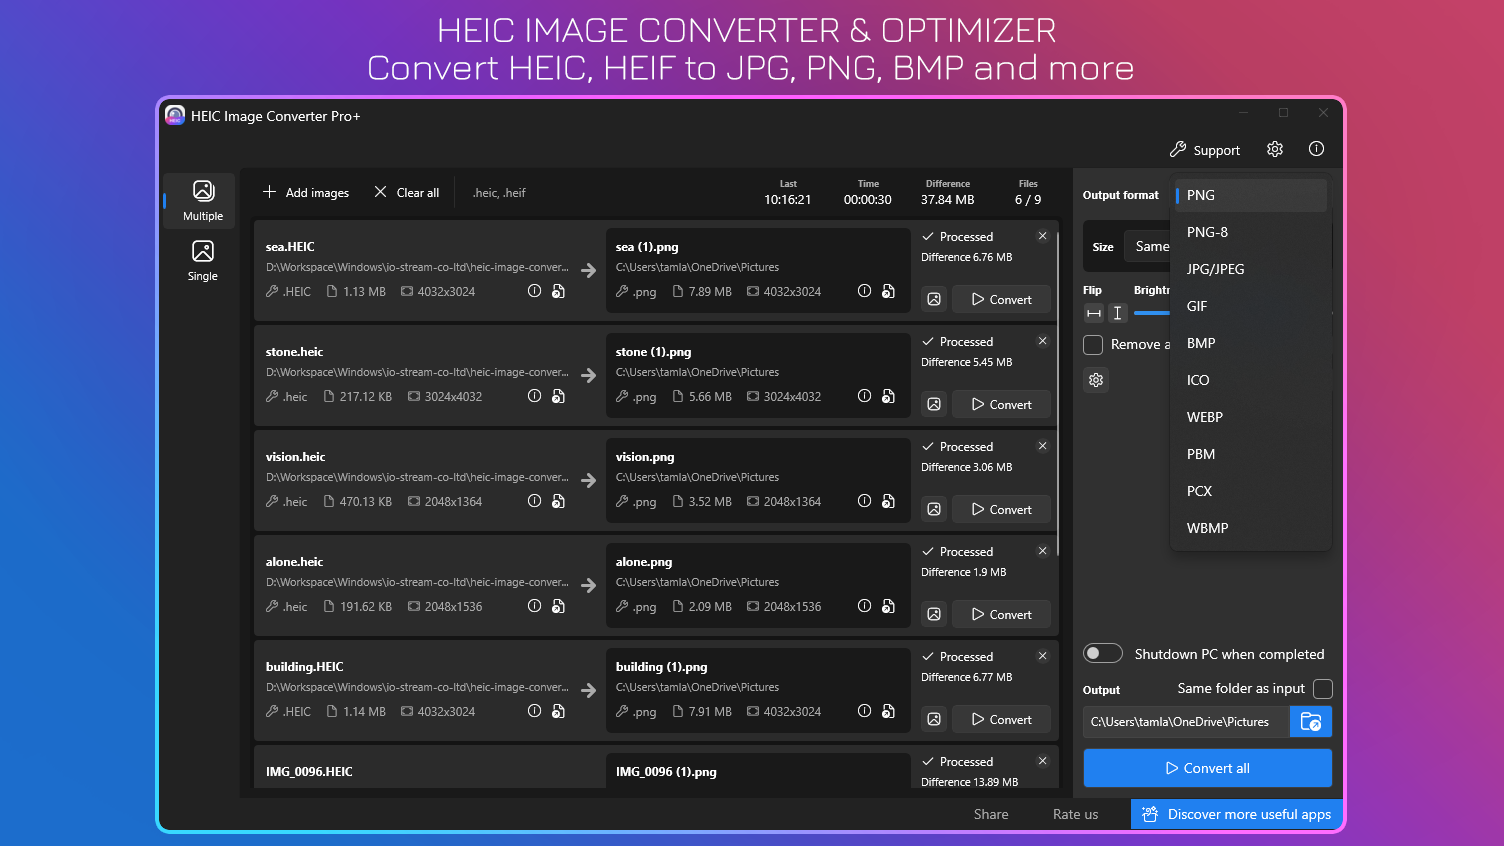 HEIC Image Converter & Optimizer - Convert HEIC, HEIF to JPG, PNG, BMP and more